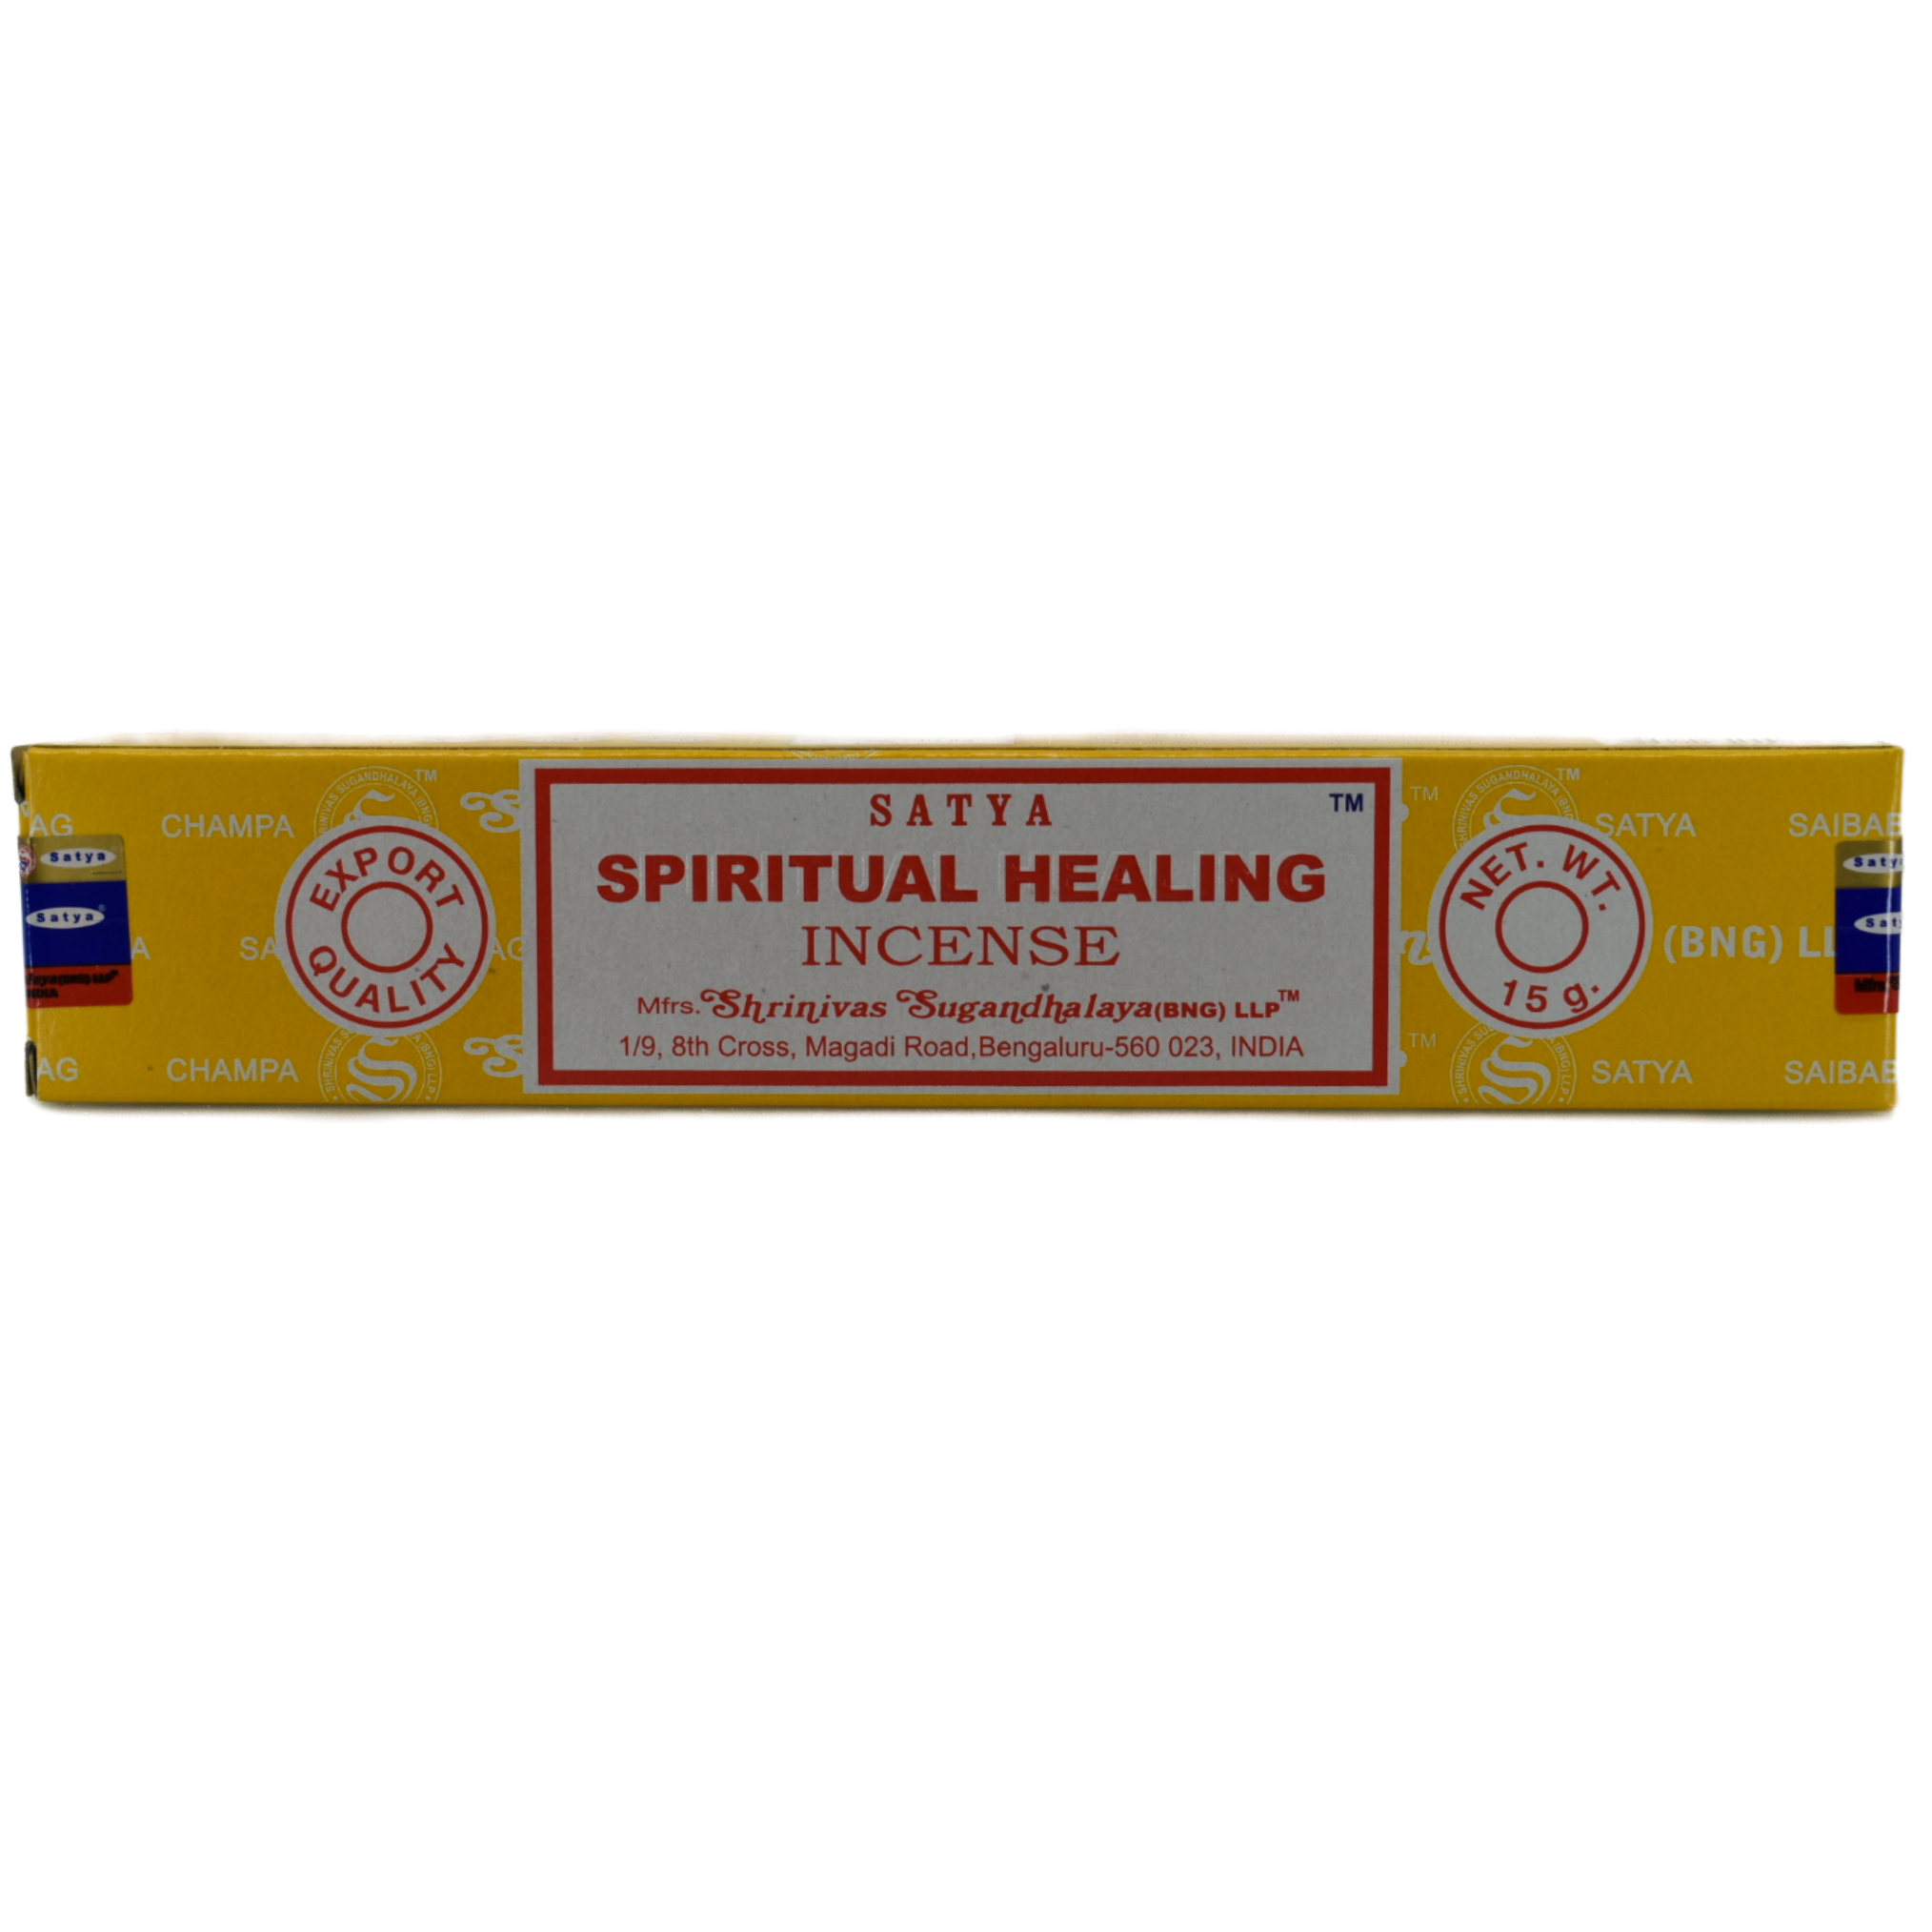 Spiritual Healing 15gr Incense Sticks.  The box is yellow with the design pattern of lines through it.  The lines have company keywords listed in white.  In the center is a rectangular box in white with a red border.  Top row has brand name Satya.  Below it is the title Spiritual Healing Incense.  At the bottom is the manufacturer&